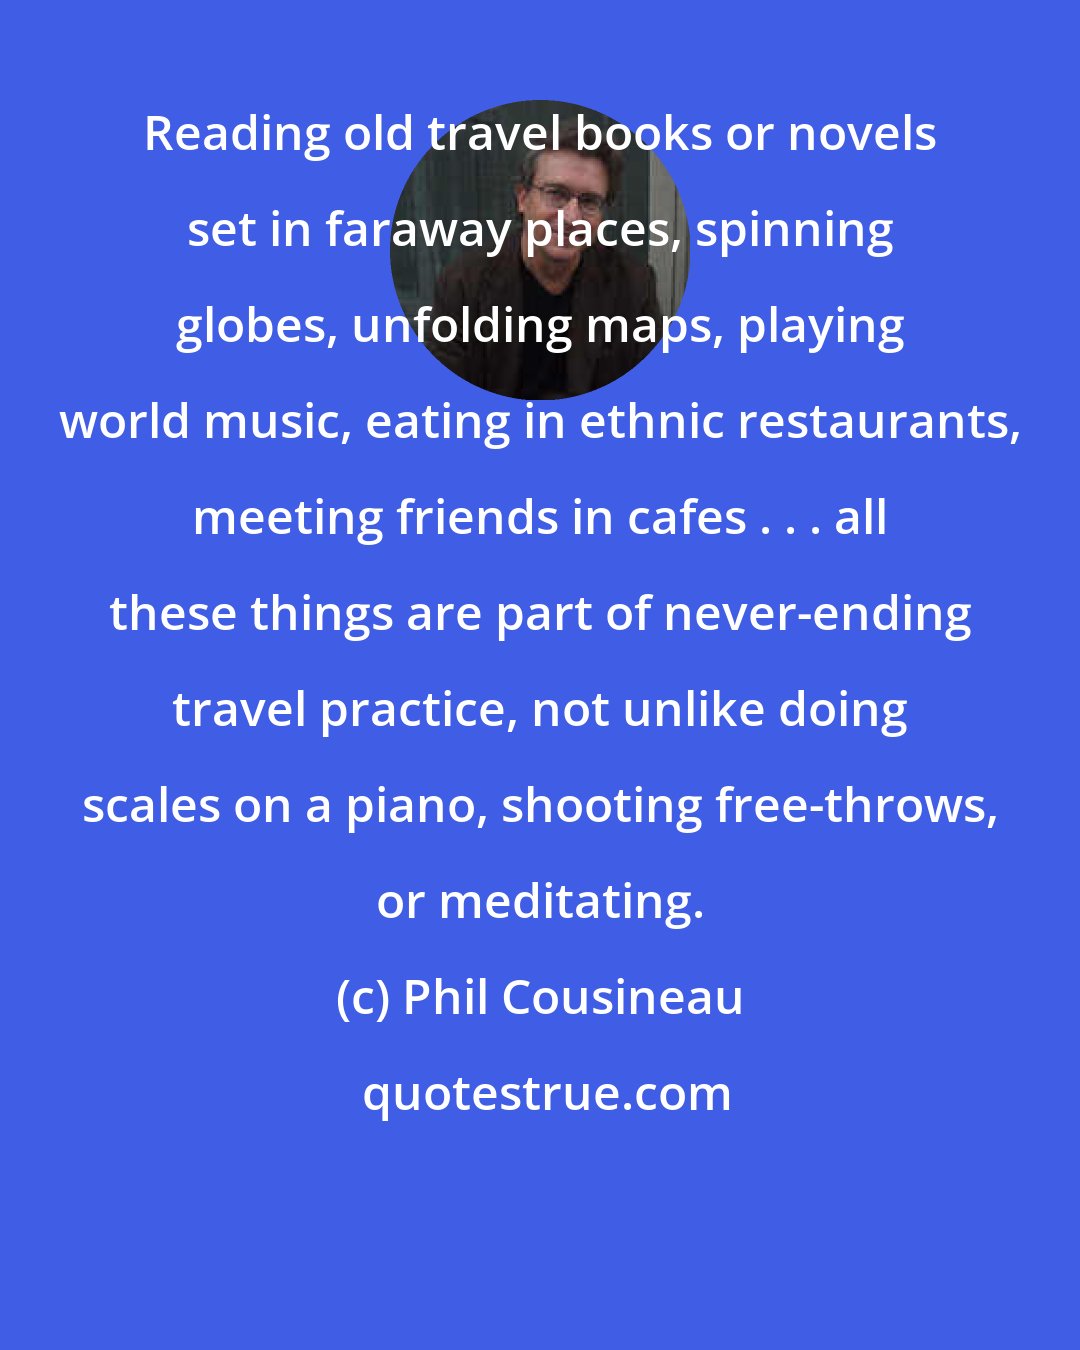 Phil Cousineau: Reading old travel books or novels set in faraway places, spinning globes, unfolding maps, playing world music, eating in ethnic restaurants, meeting friends in cafes . . . all these things are part of never-ending travel practice, not unlike doing scales on a piano, shooting free-throws, or meditating.